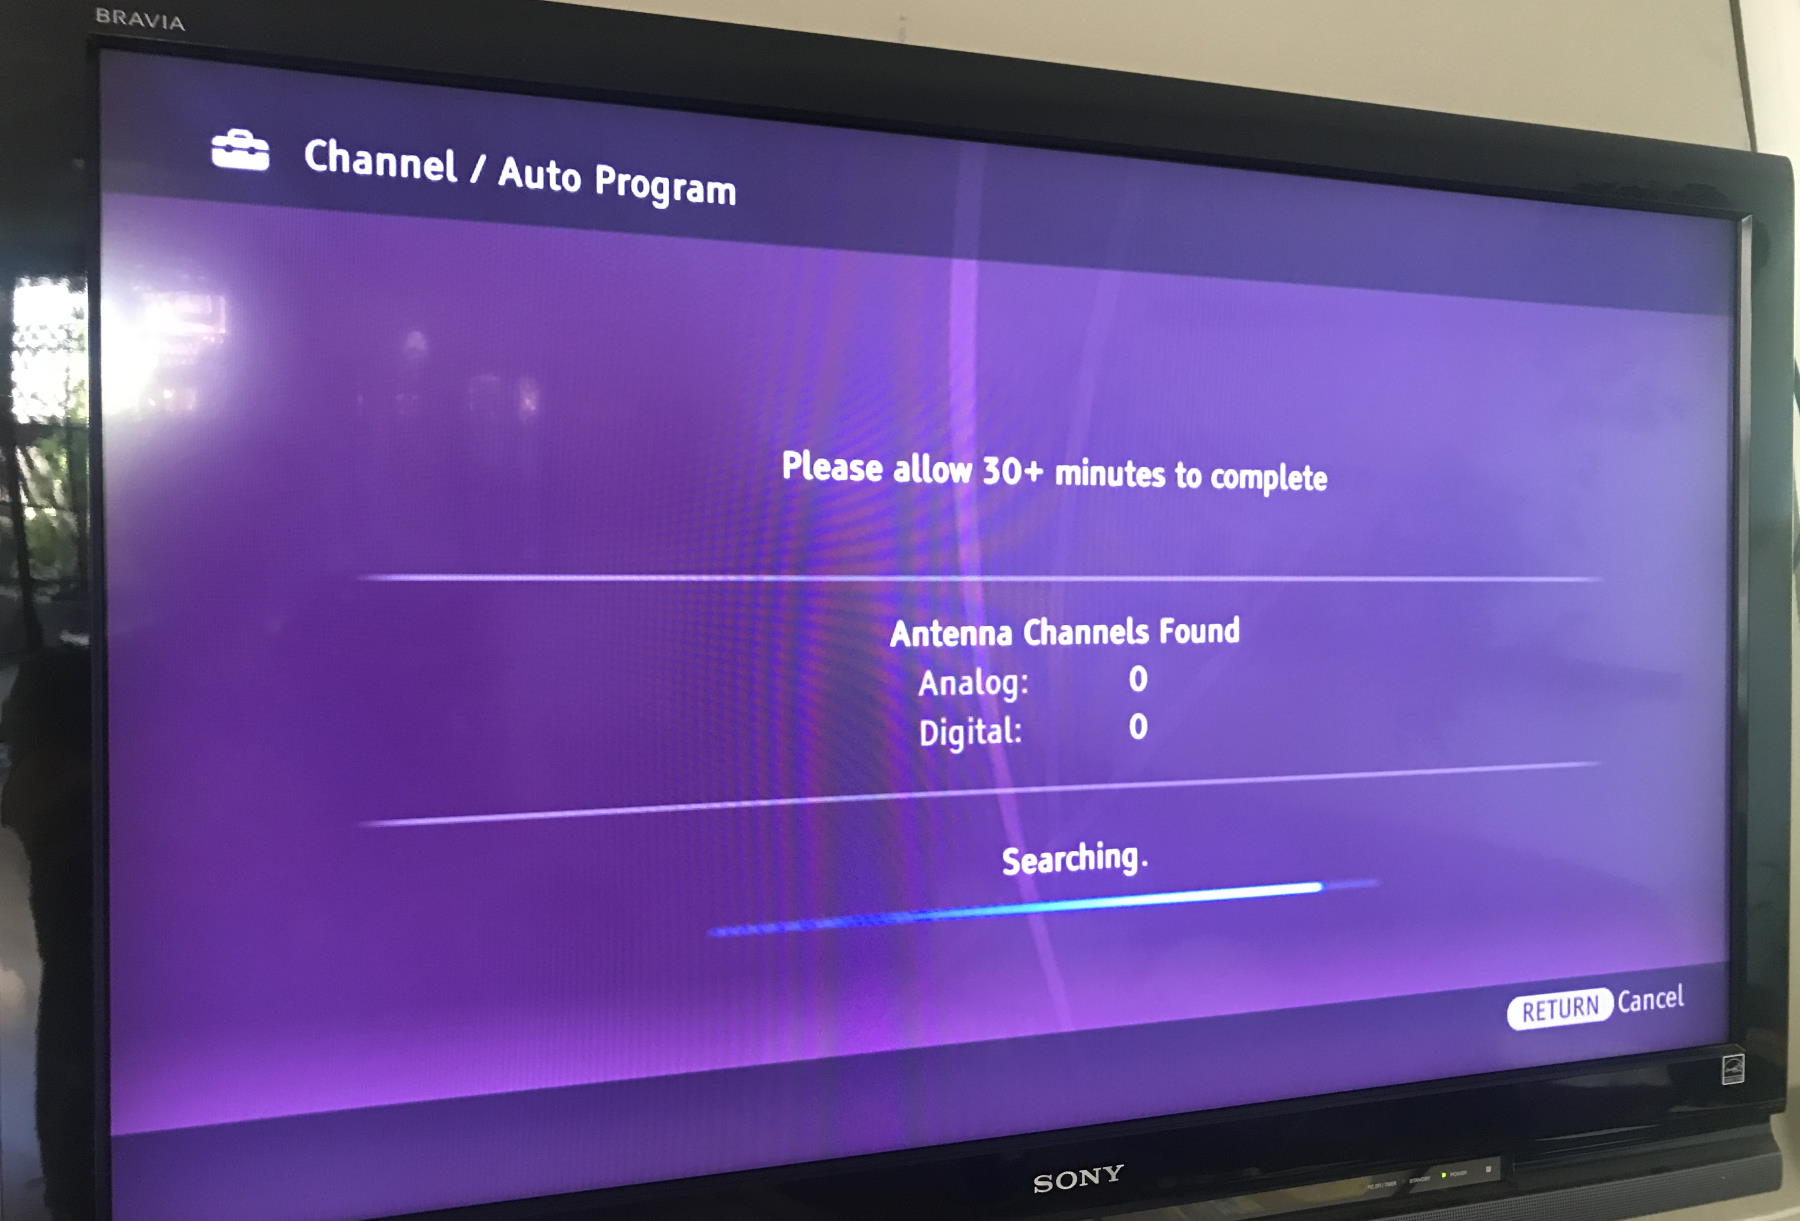 Sony Bravia TV scanning for channels